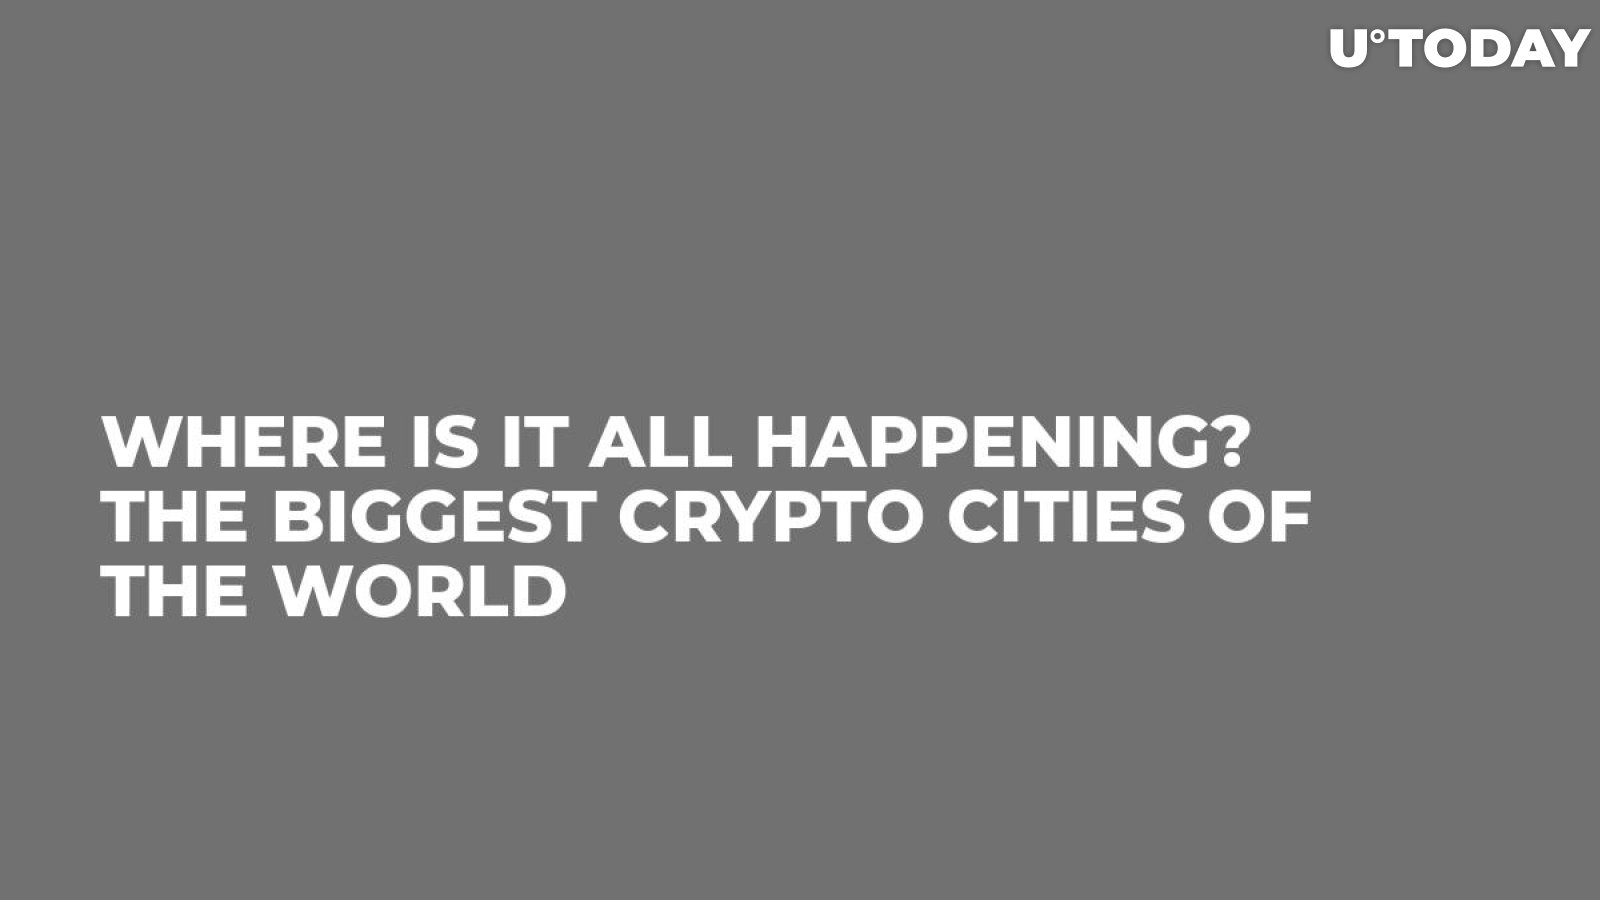 Where Is It All Happening? The Biggest Crypto Cities of the World